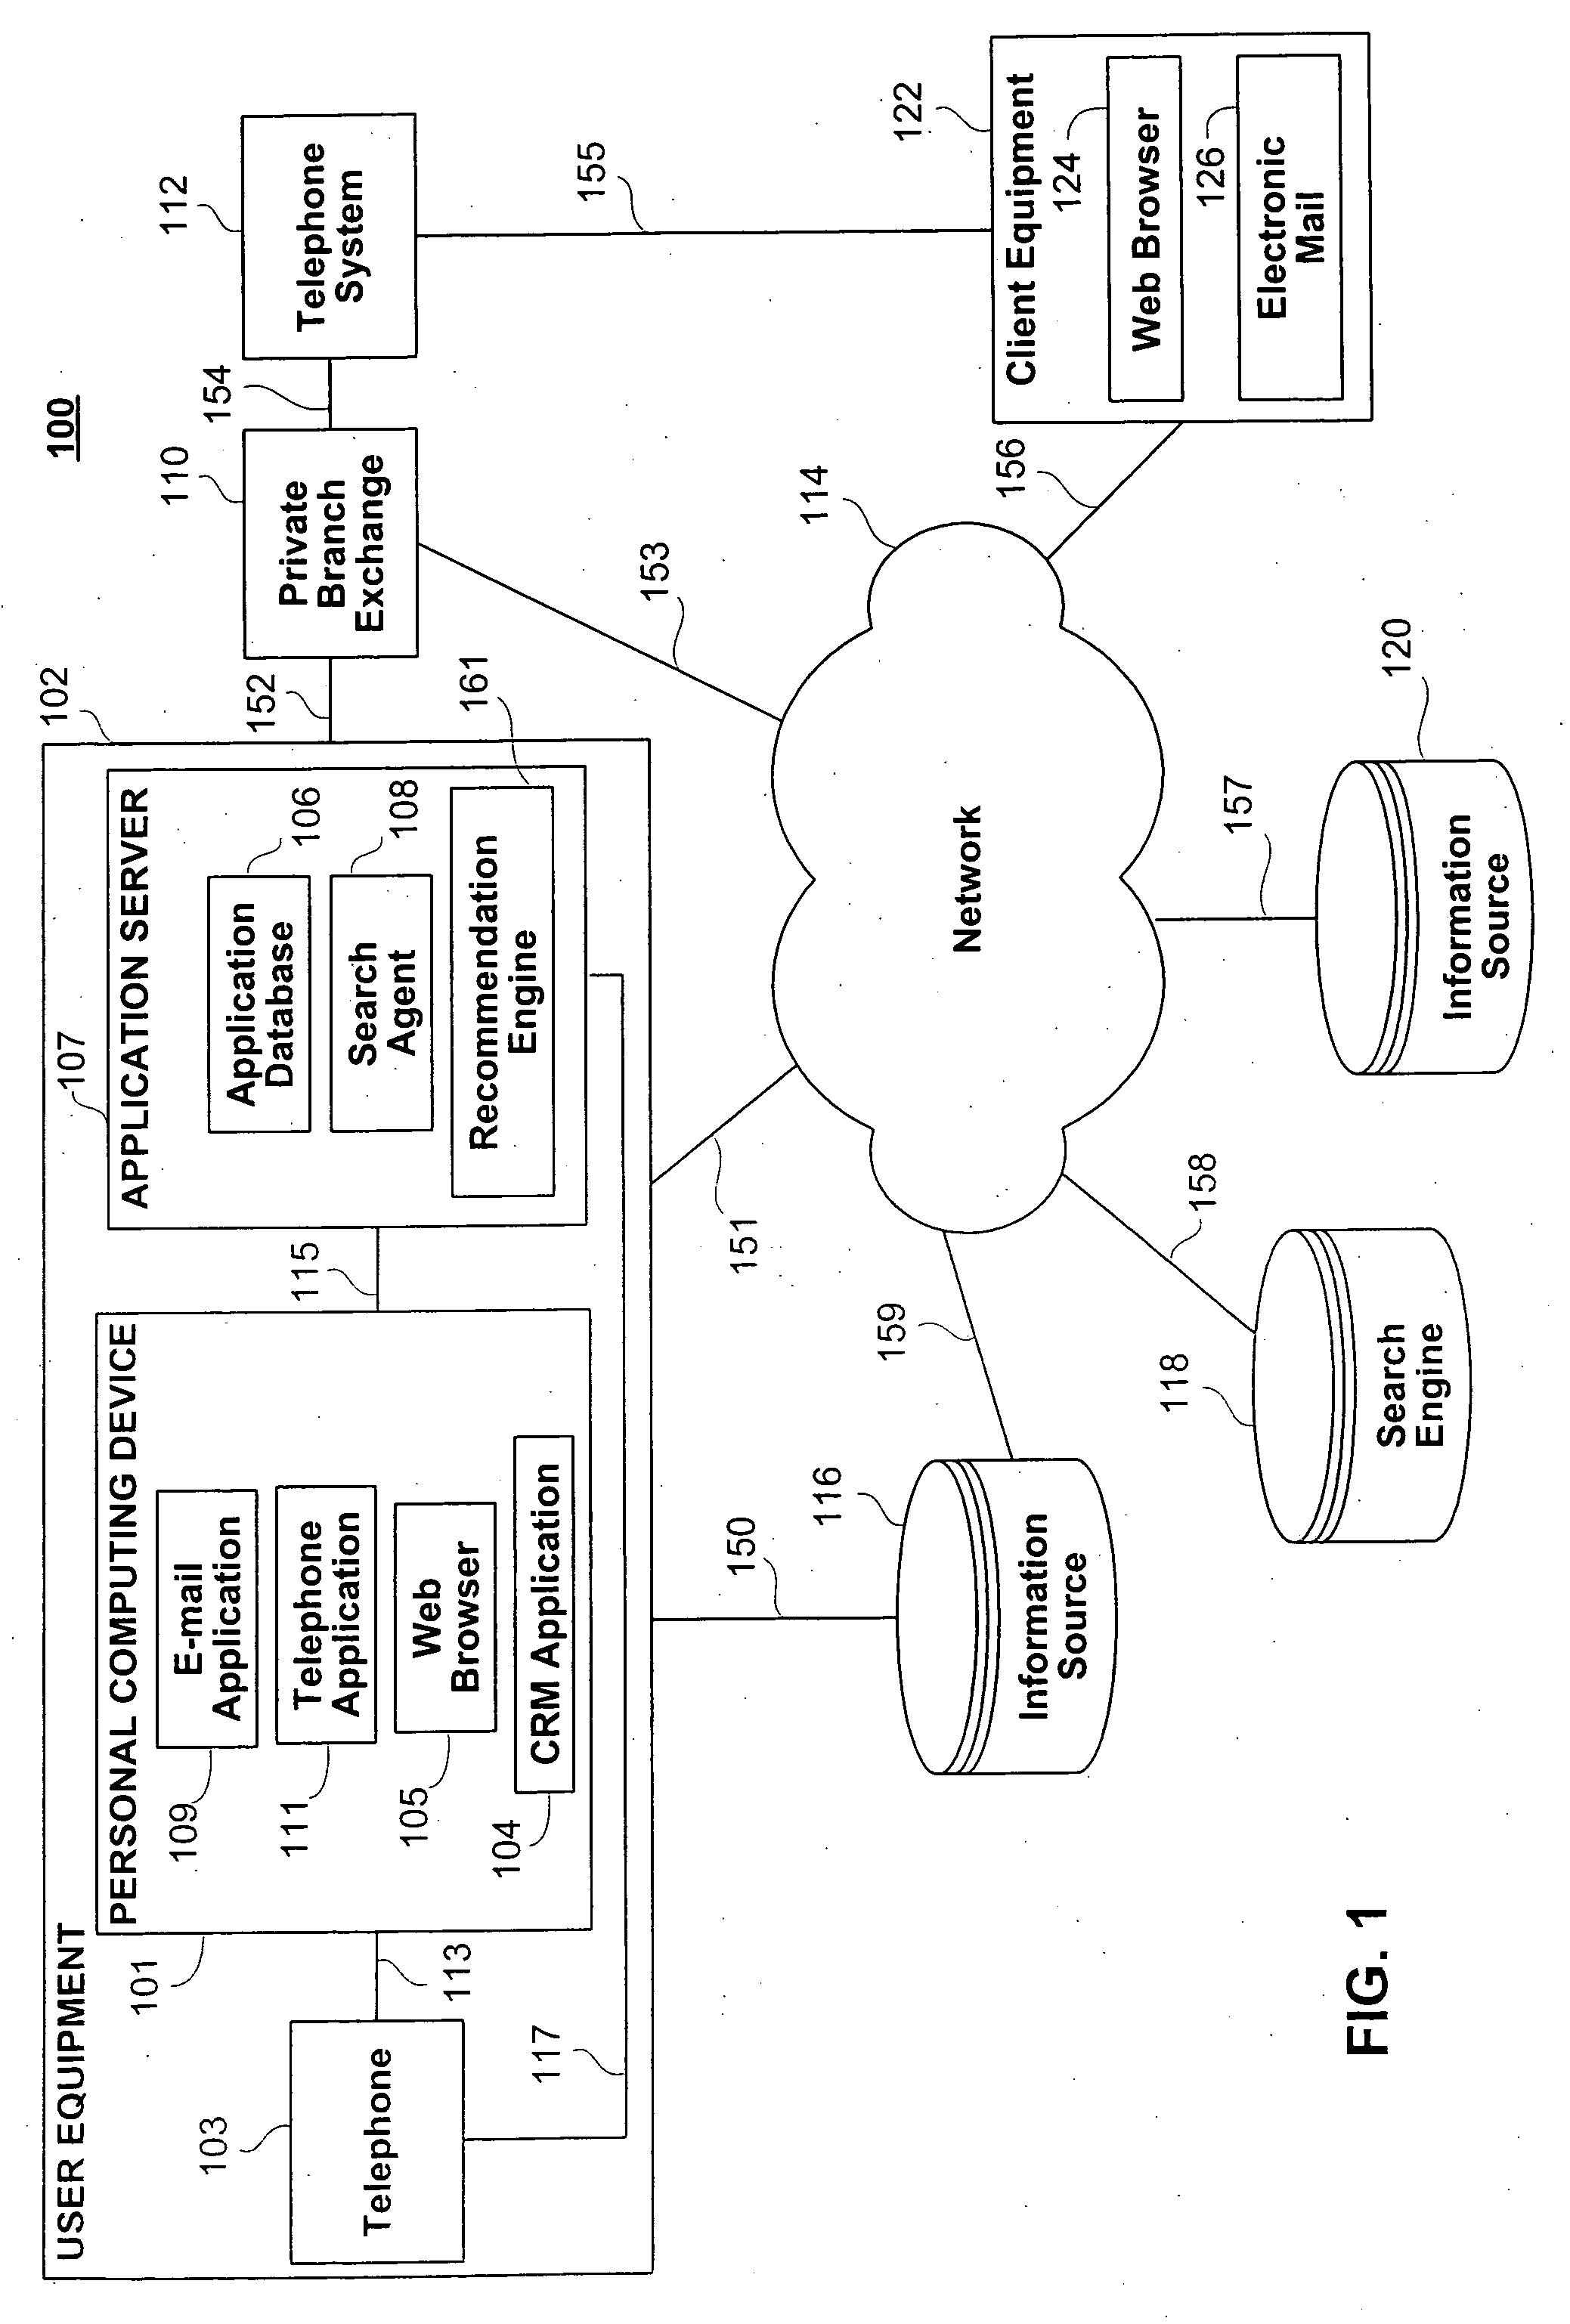 Enhanced client relationship management systems and methods with a recommendation engine